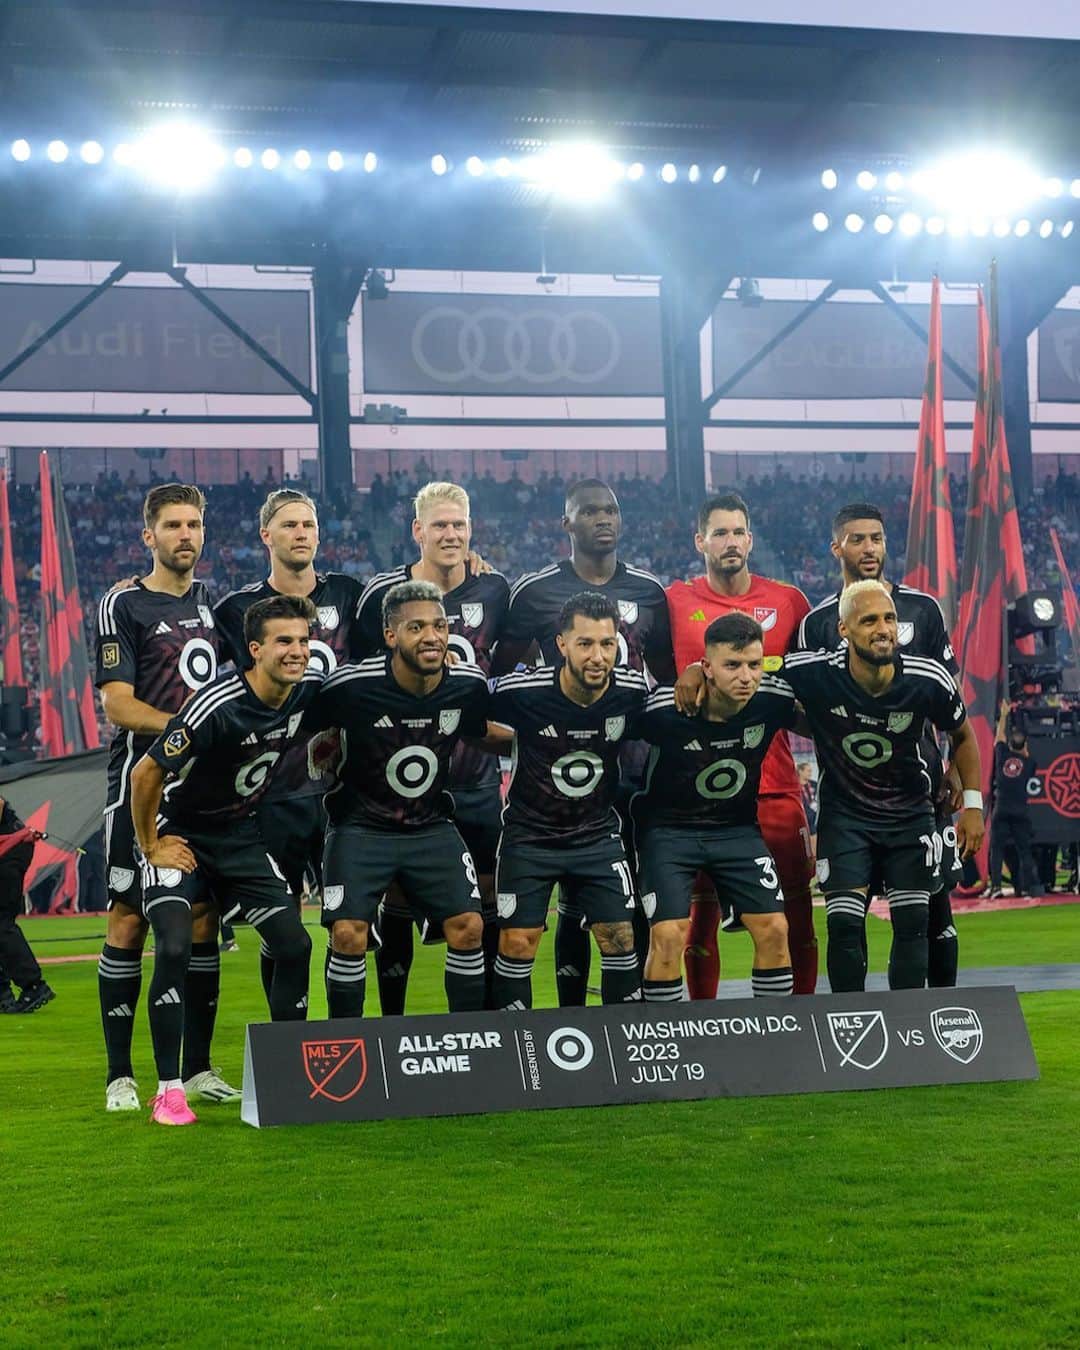 Audiのインスタグラム：「We joined a record 20,621 fans and the MLS All-Stars at @AudiField last week for a night to remember.  #AudiRSetronGT #AudiQ8etron #Soccer #MLS #MLSAllStar #Football」